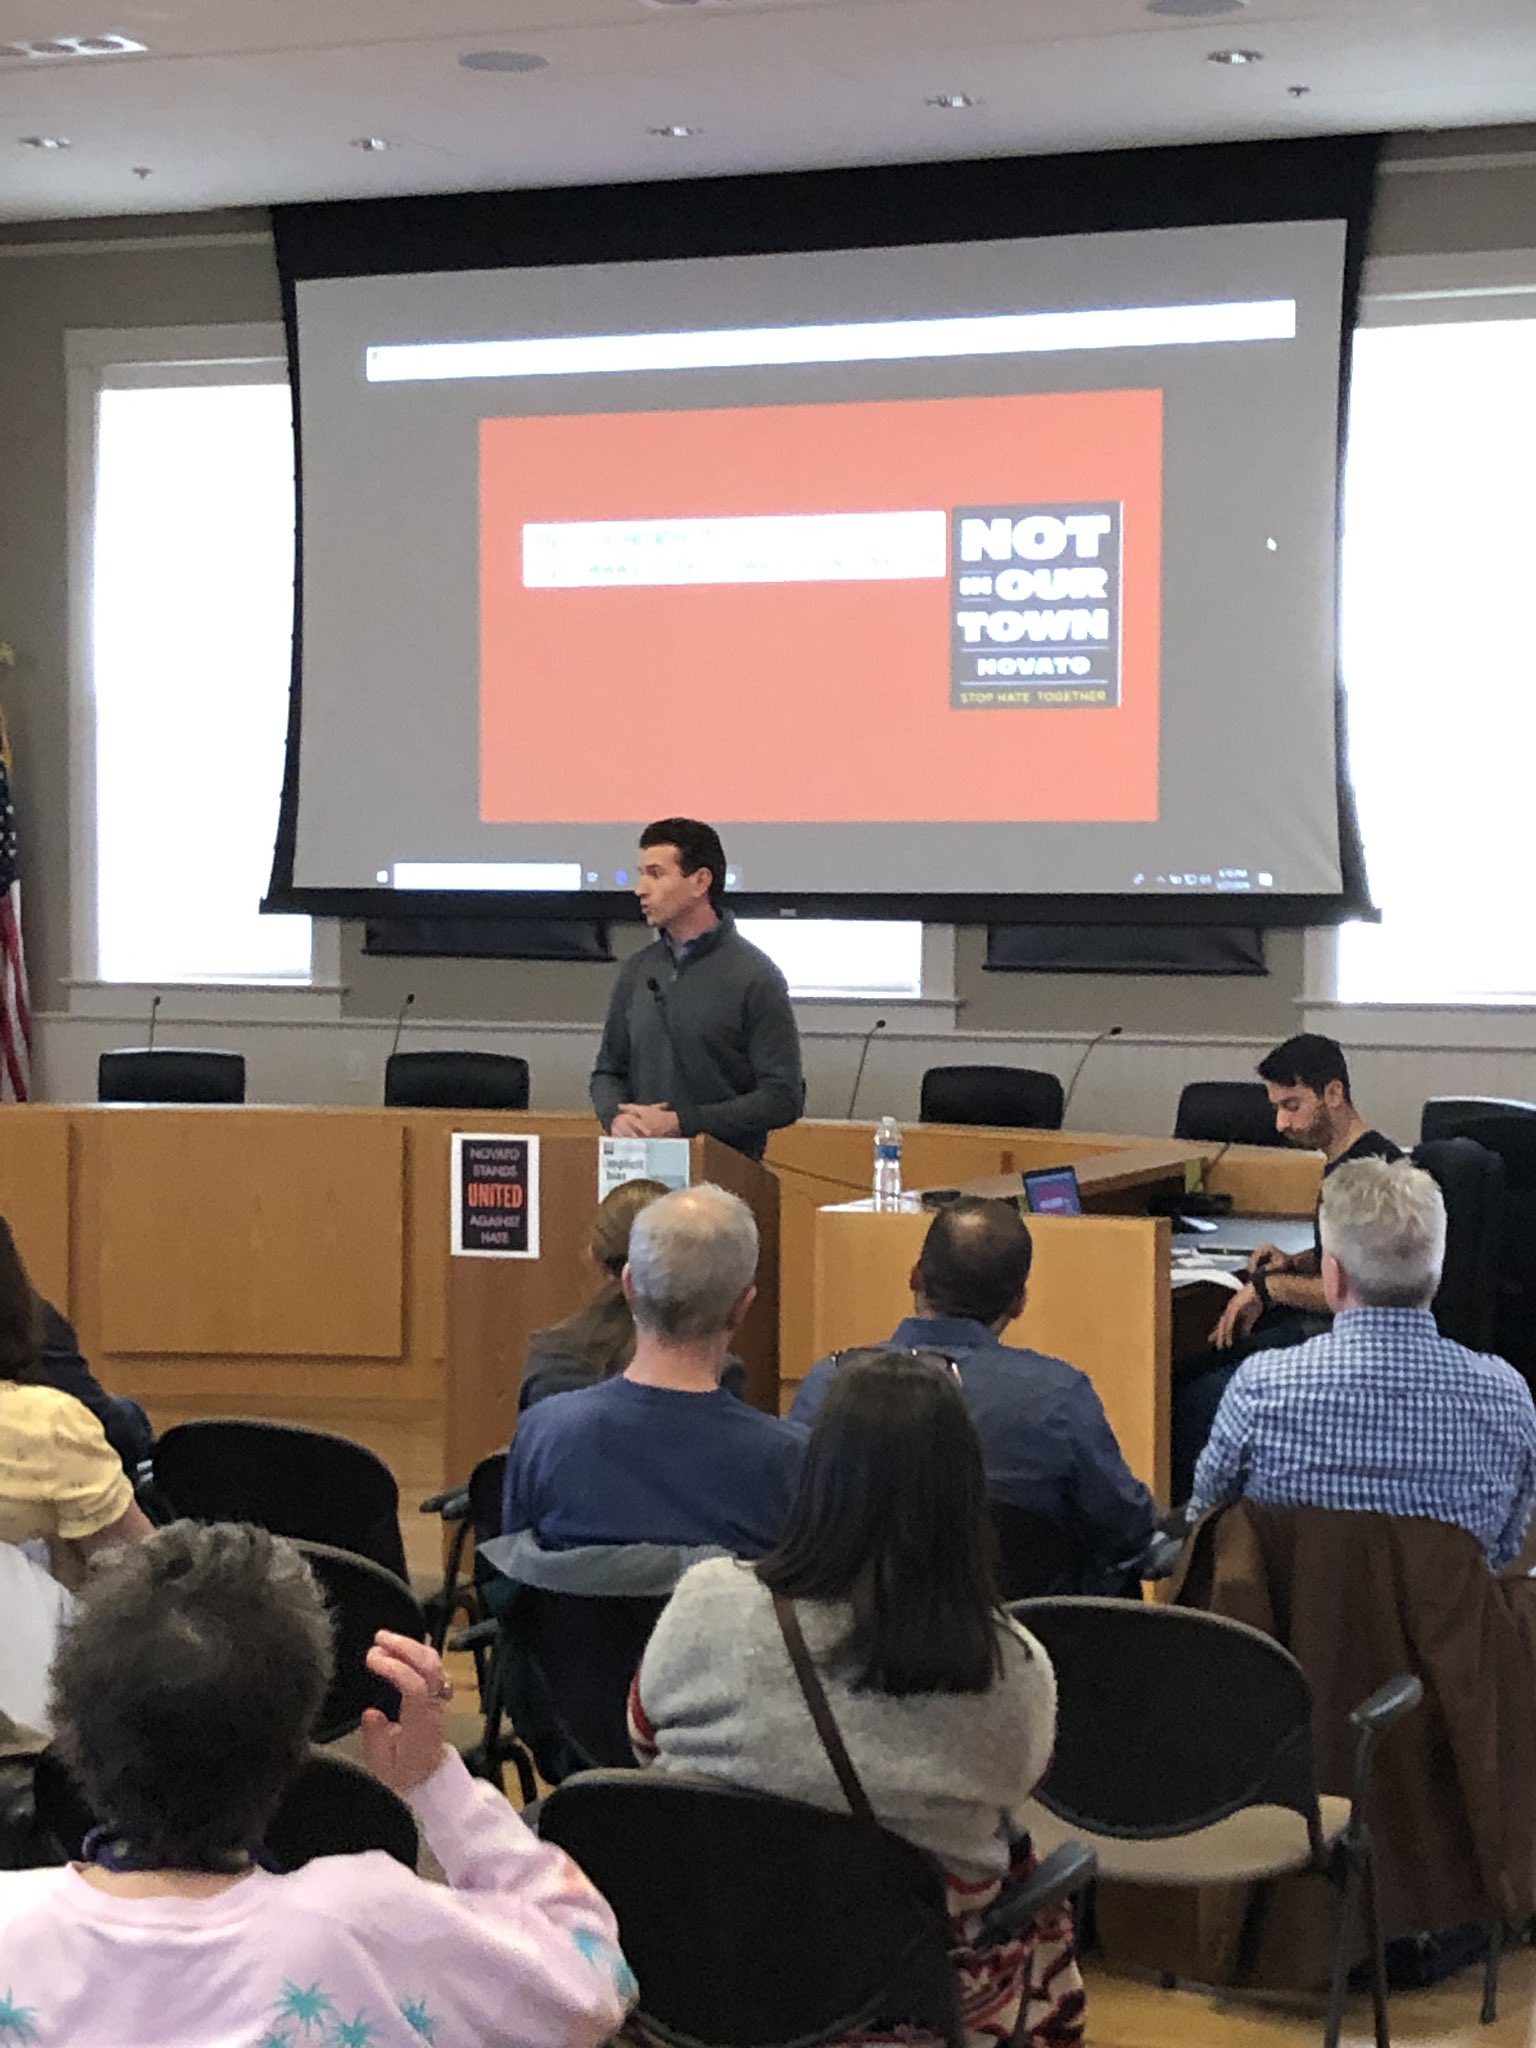 Happening now. Mayor @ericlucan opens our community conversation and workshop on Implicit Bias being held at @TweetNovato City Hall. @notinourtown